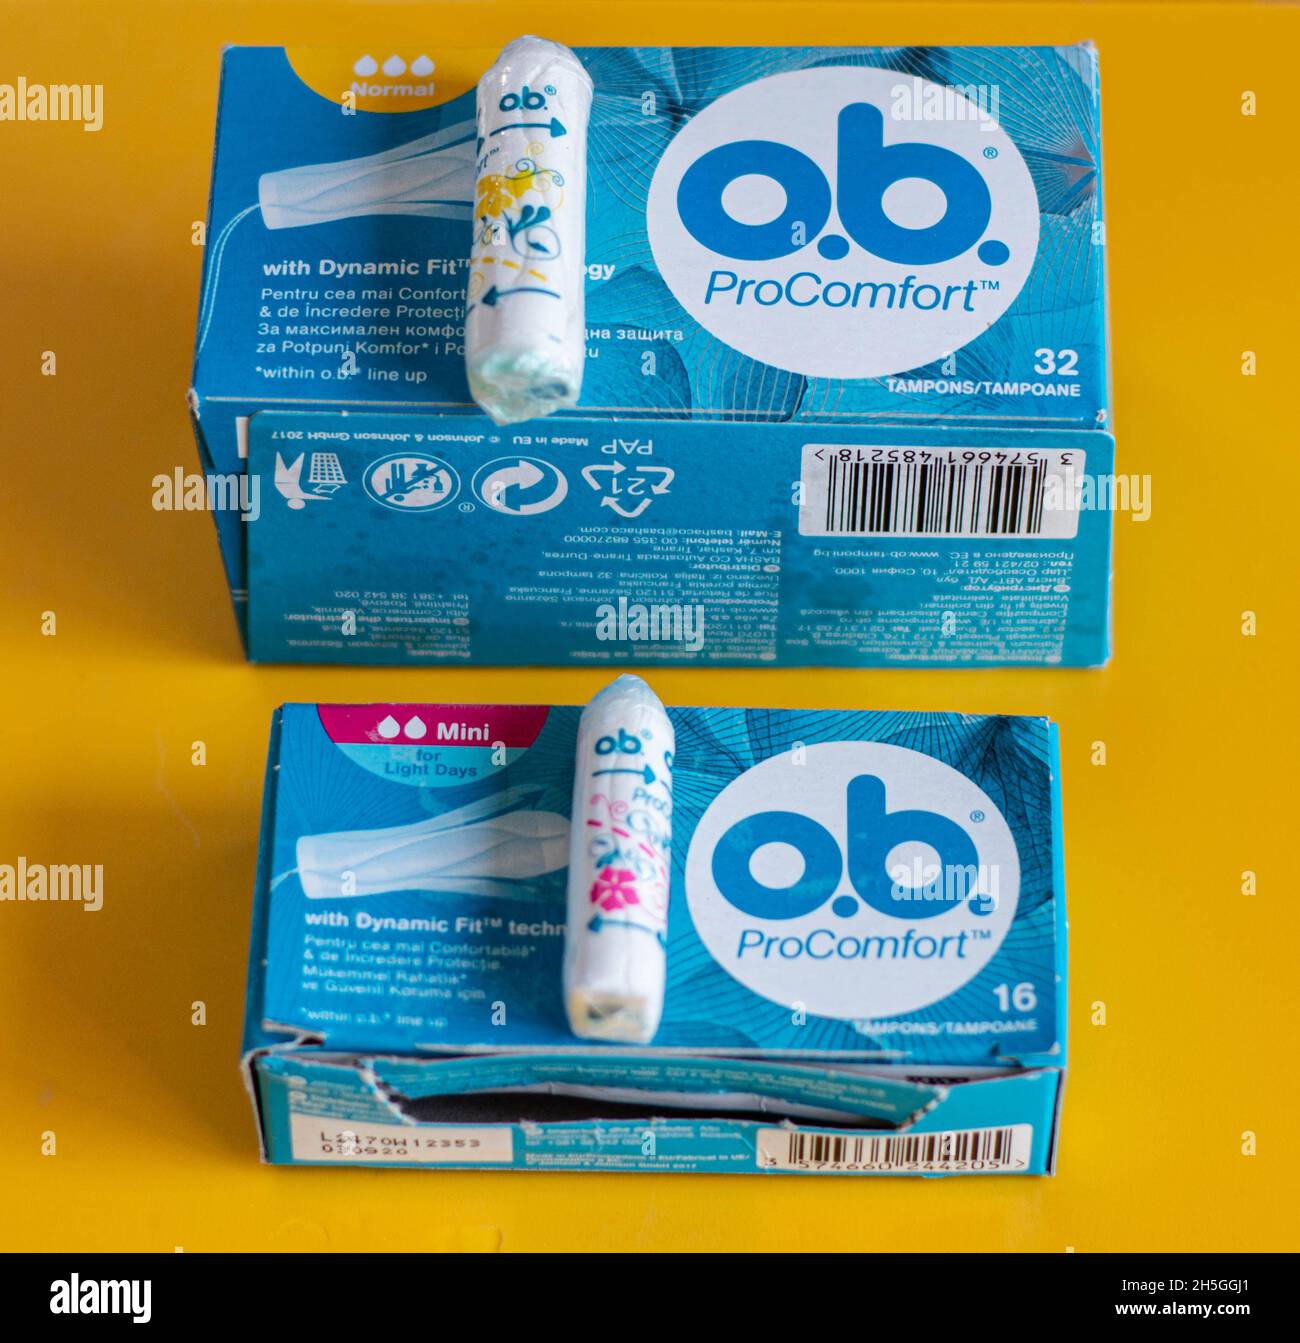 https://c8.alamy.com/comp/2H5GGJ1/cluj-napoca-romania-jun-10-2021-packages-of-ob-tampons-a-global-brand-of-feminine-hygiene-products-or-personal-care-products-used-by-women-dur-2H5GGJ1.jpg